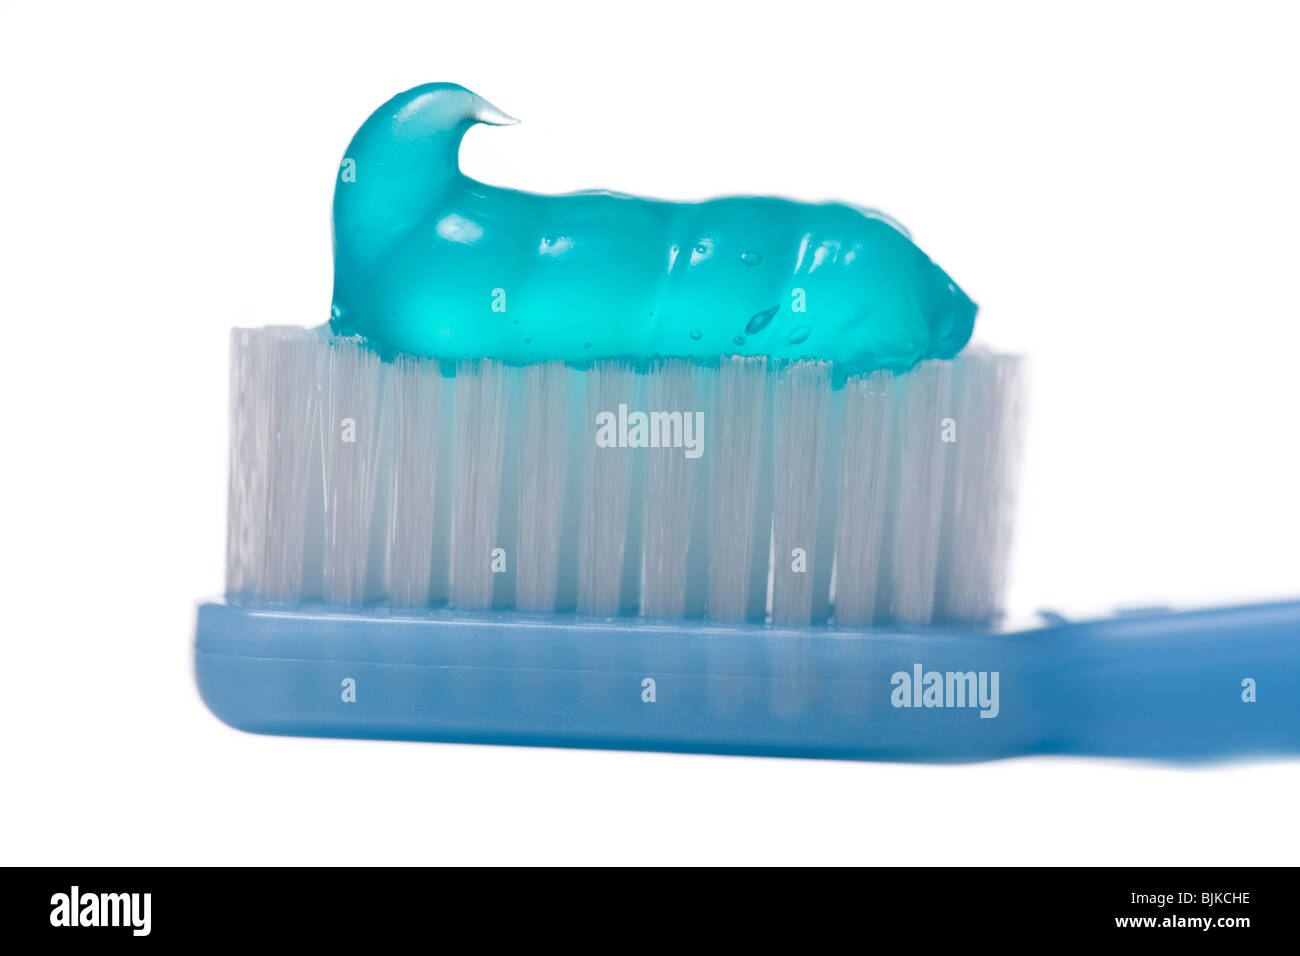 Toothbrush with toothpaste Stock Photo - Alamy